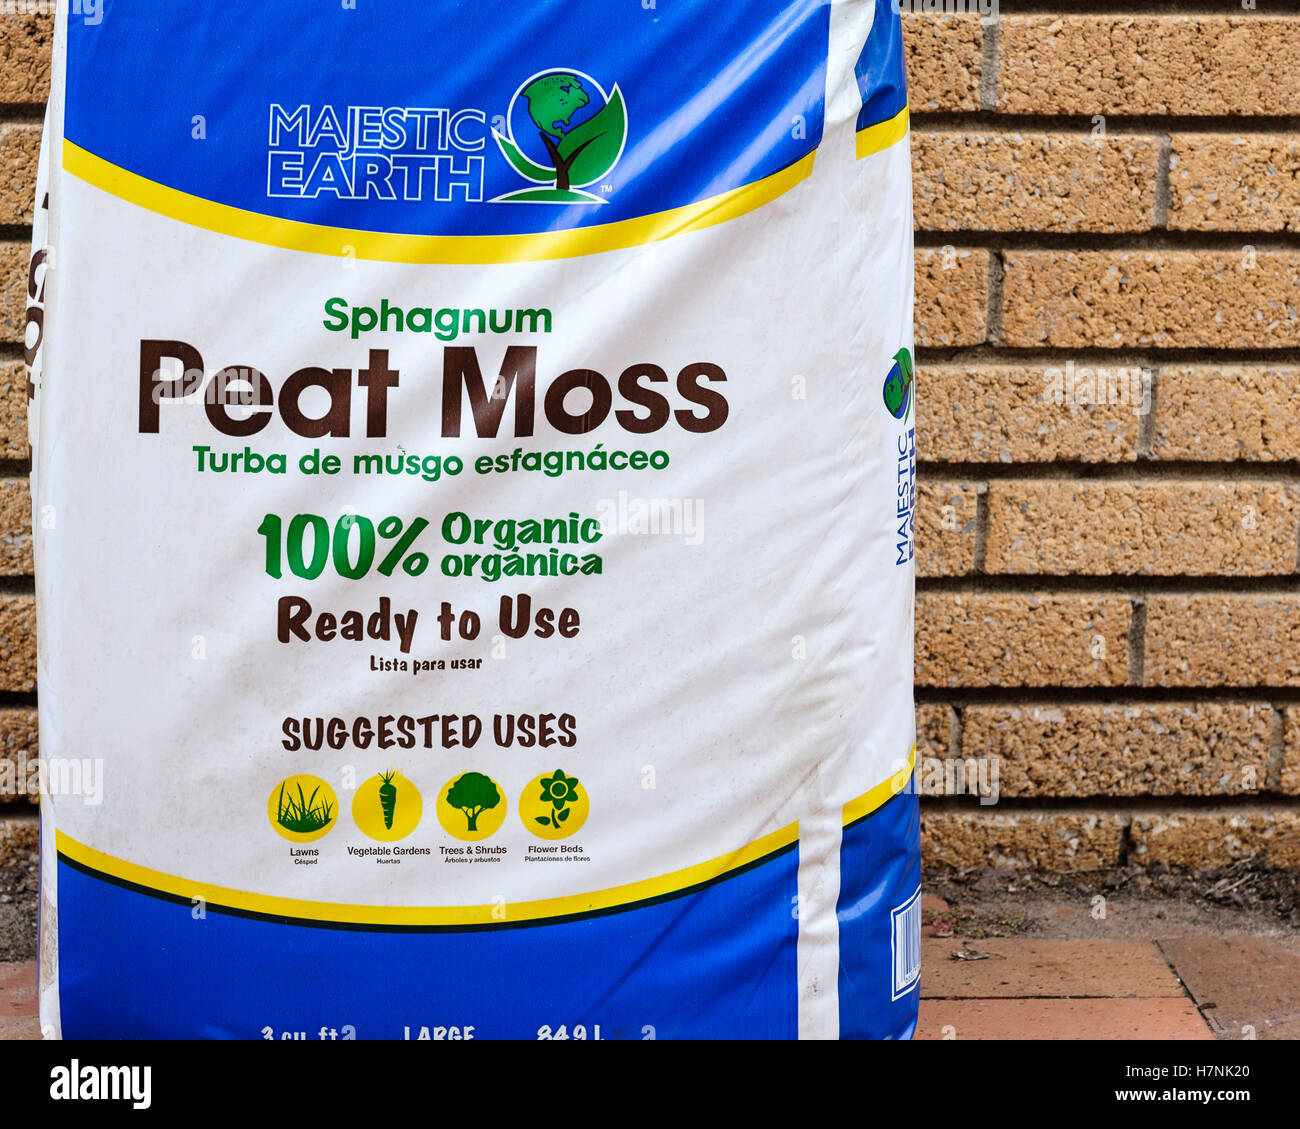 A bag of Sphagnum peat moss for gardening. USA. Stock Photo